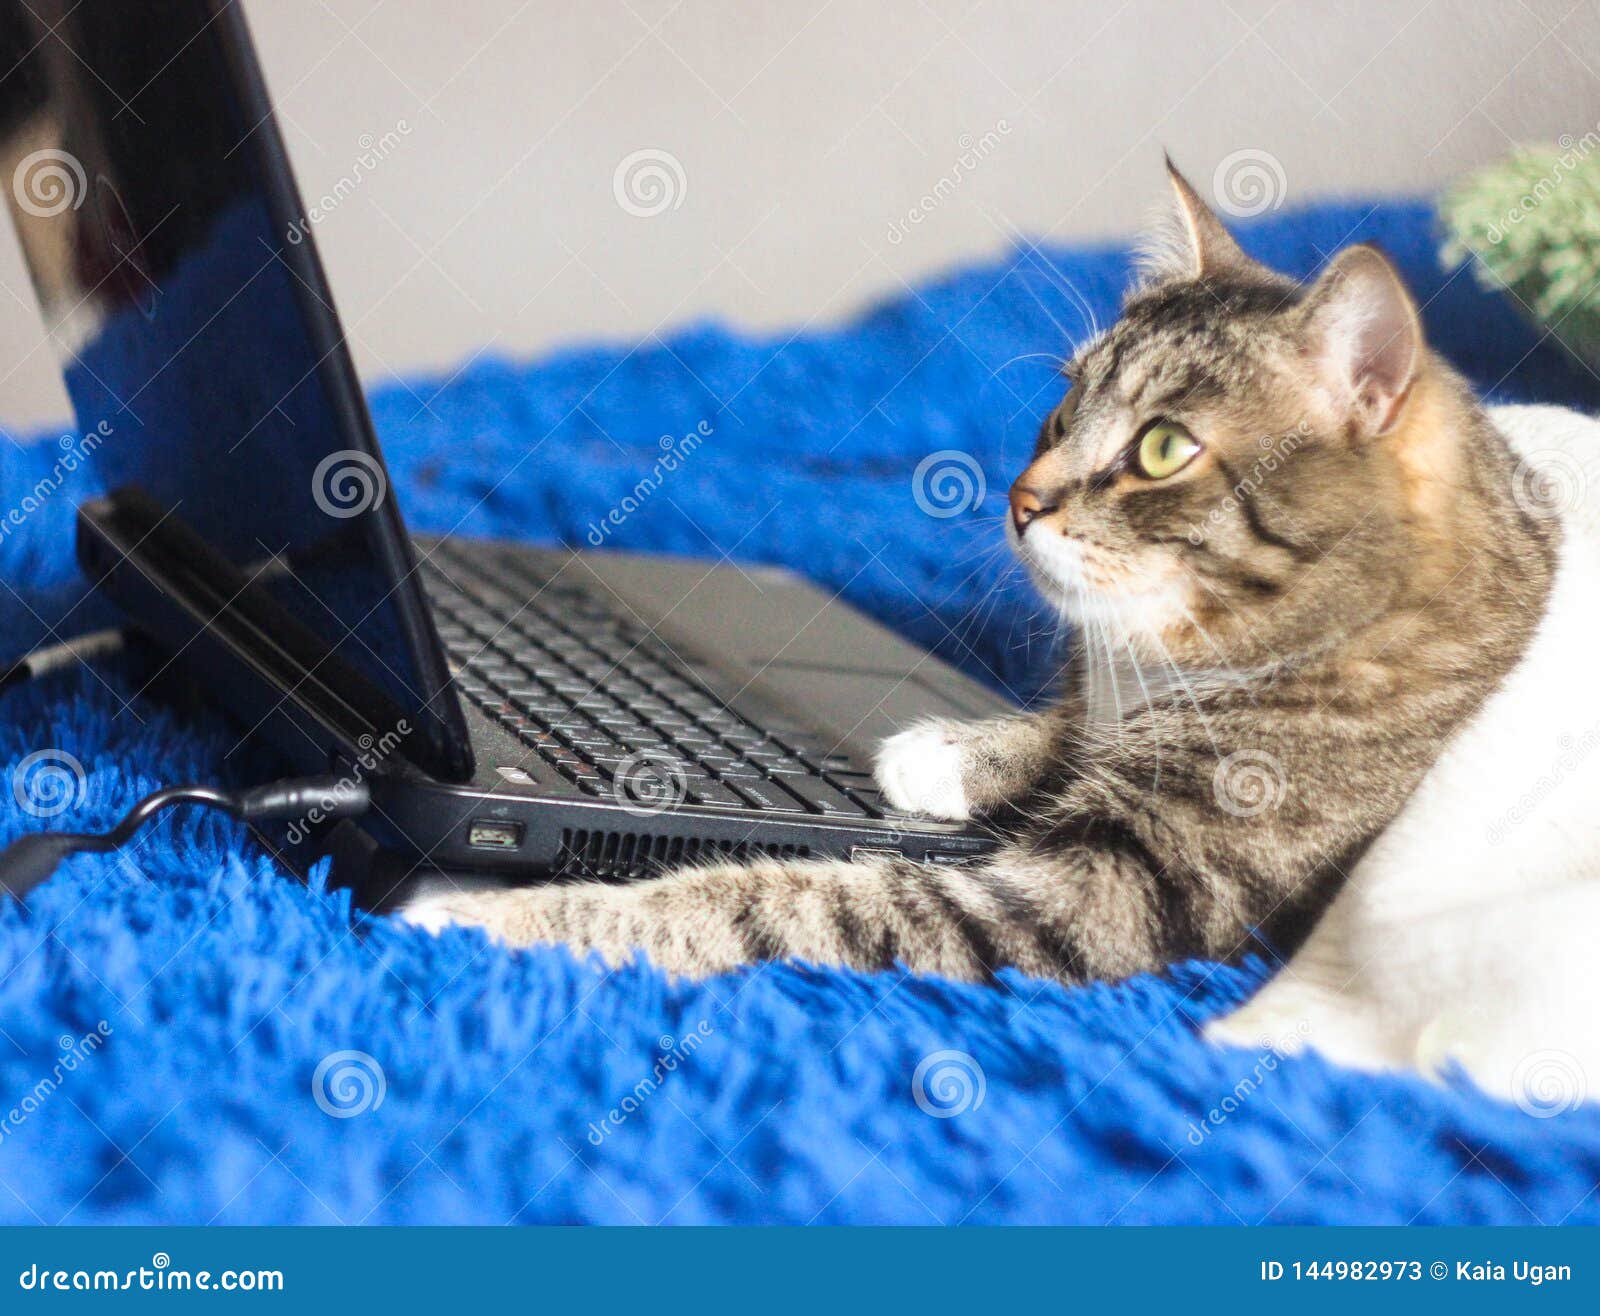 Cute Funny Cat with Laptop on Sofa at Home, Blue Background. Stock Image -  Image of fluffy, looking: 144982973